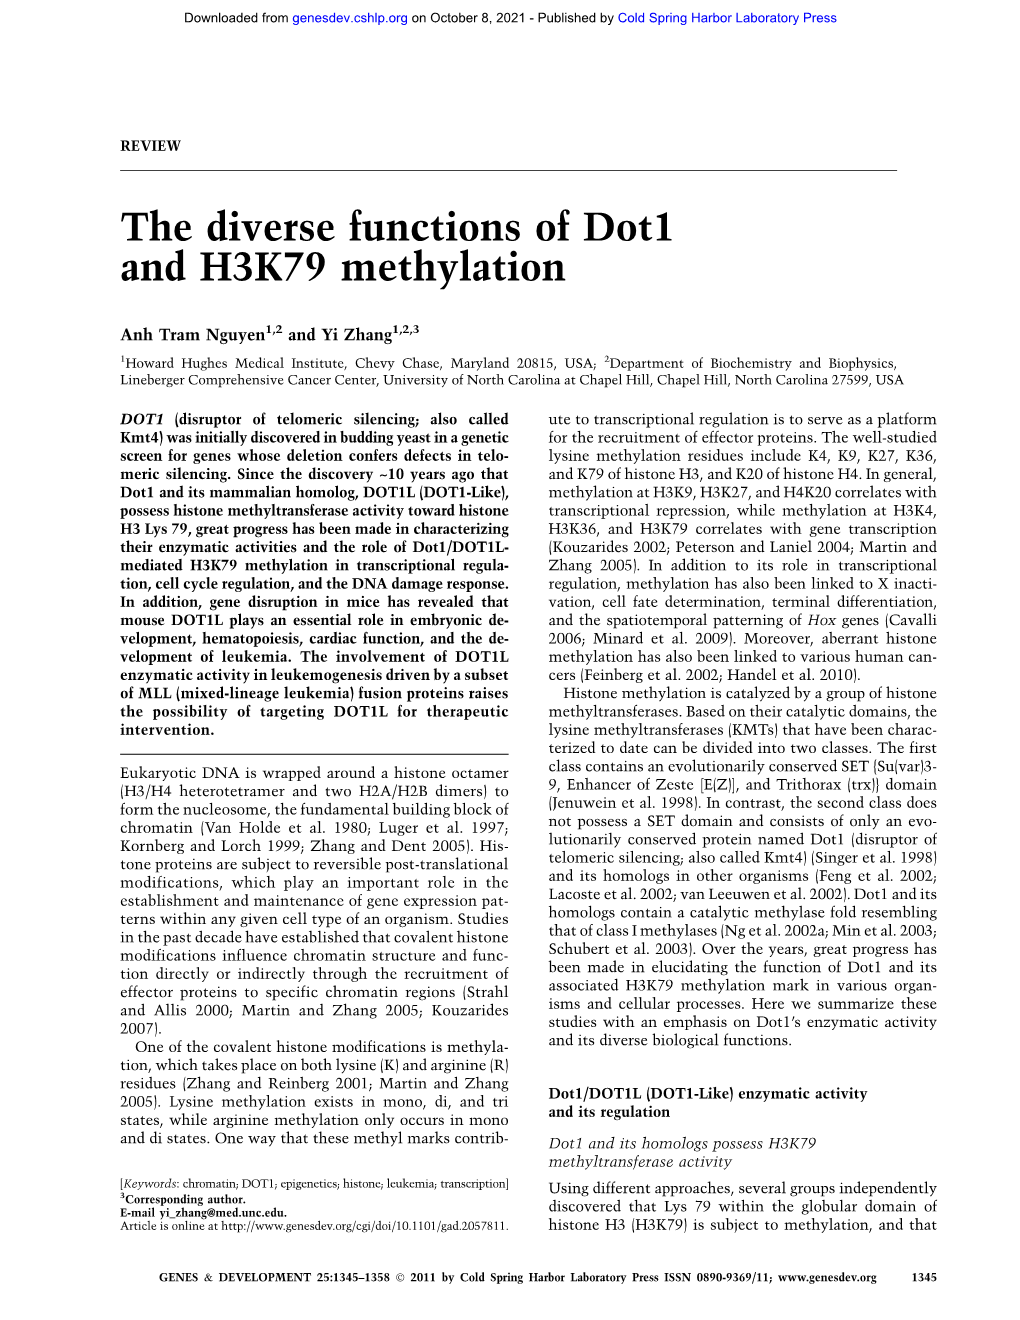 The Diverse Functions of Dot1 and H3K79 Methylation